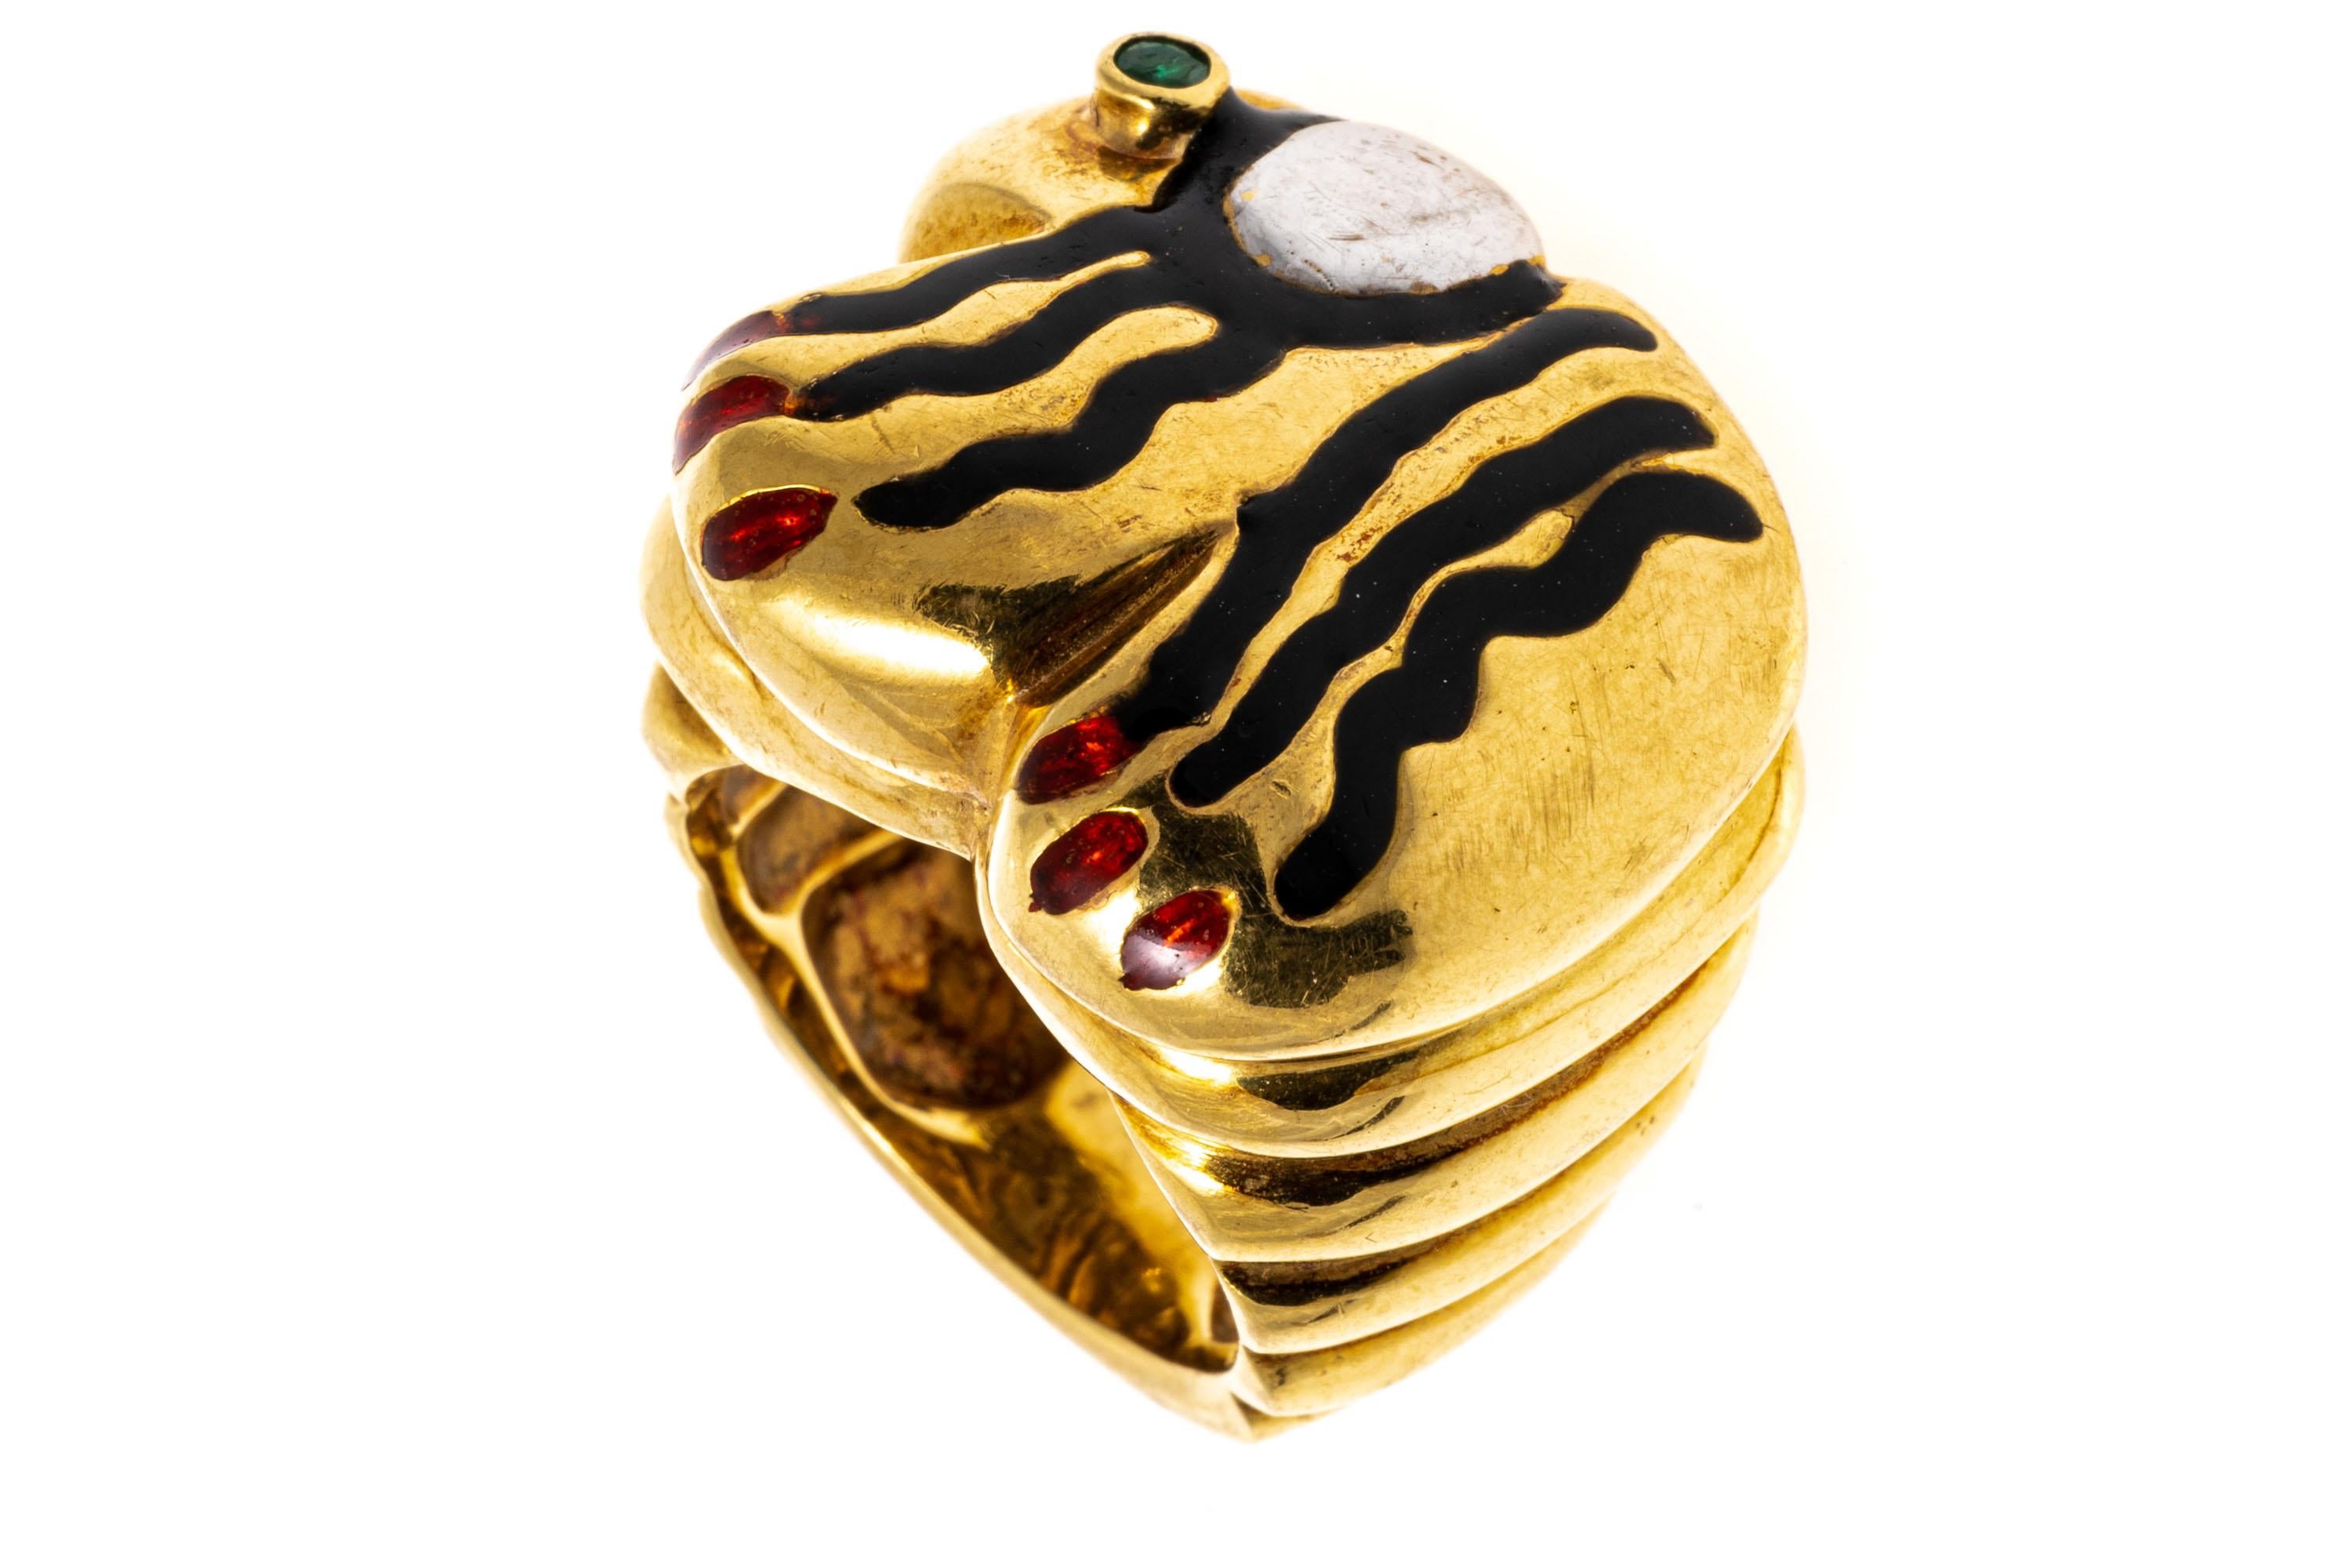 14k yellow gold ring. This funky dome ring has a quirky animal top, with a squiggled black enamel body, red enamel toes and a round faceted, medium green color emerald eye, approximately 0.04 CTS, bezel set.
Marks: Tested 14k
Dimensions: 1